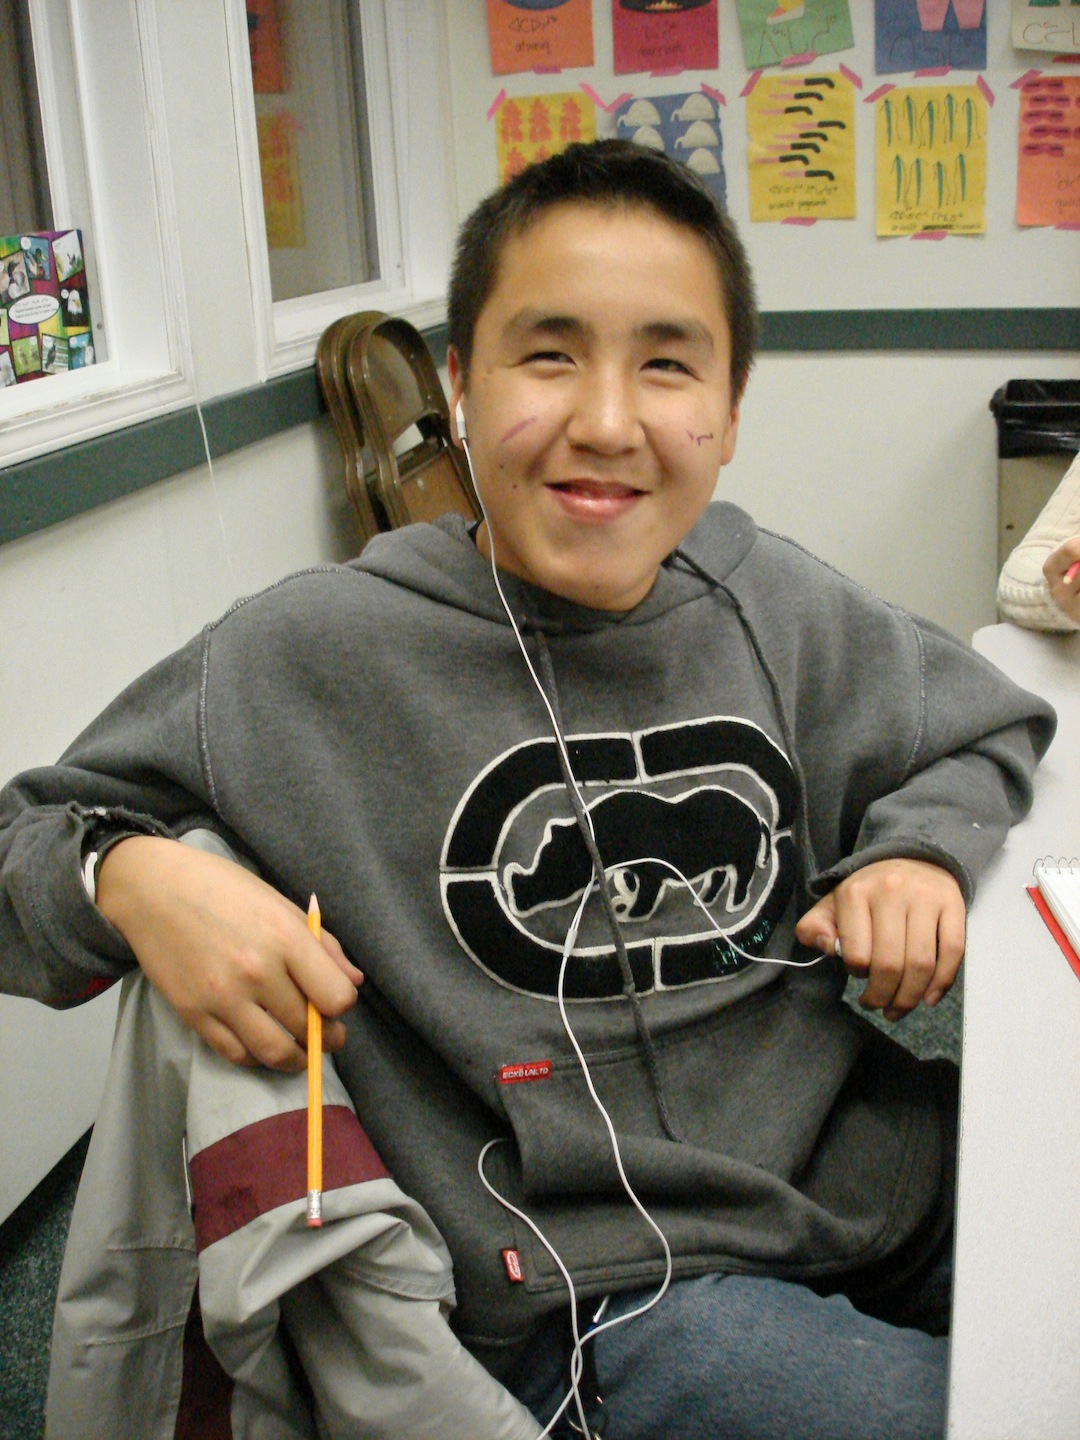 Tyrone Powder, 13, who originally comes from Grise Fiord, has lived in Yellowknife for several years.